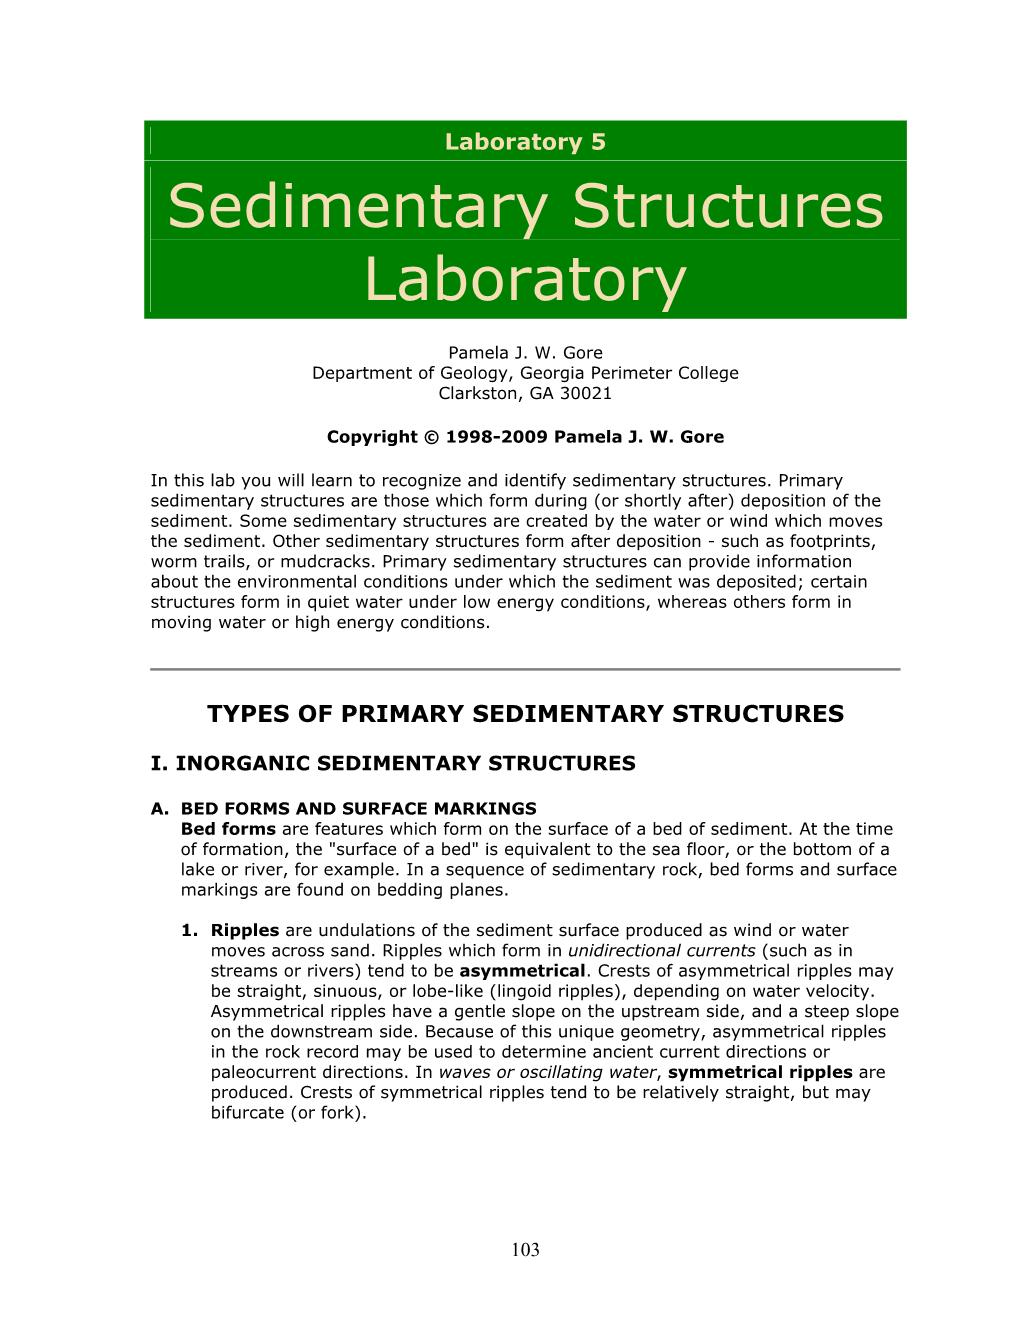 Sedimentary Structures Laboratory